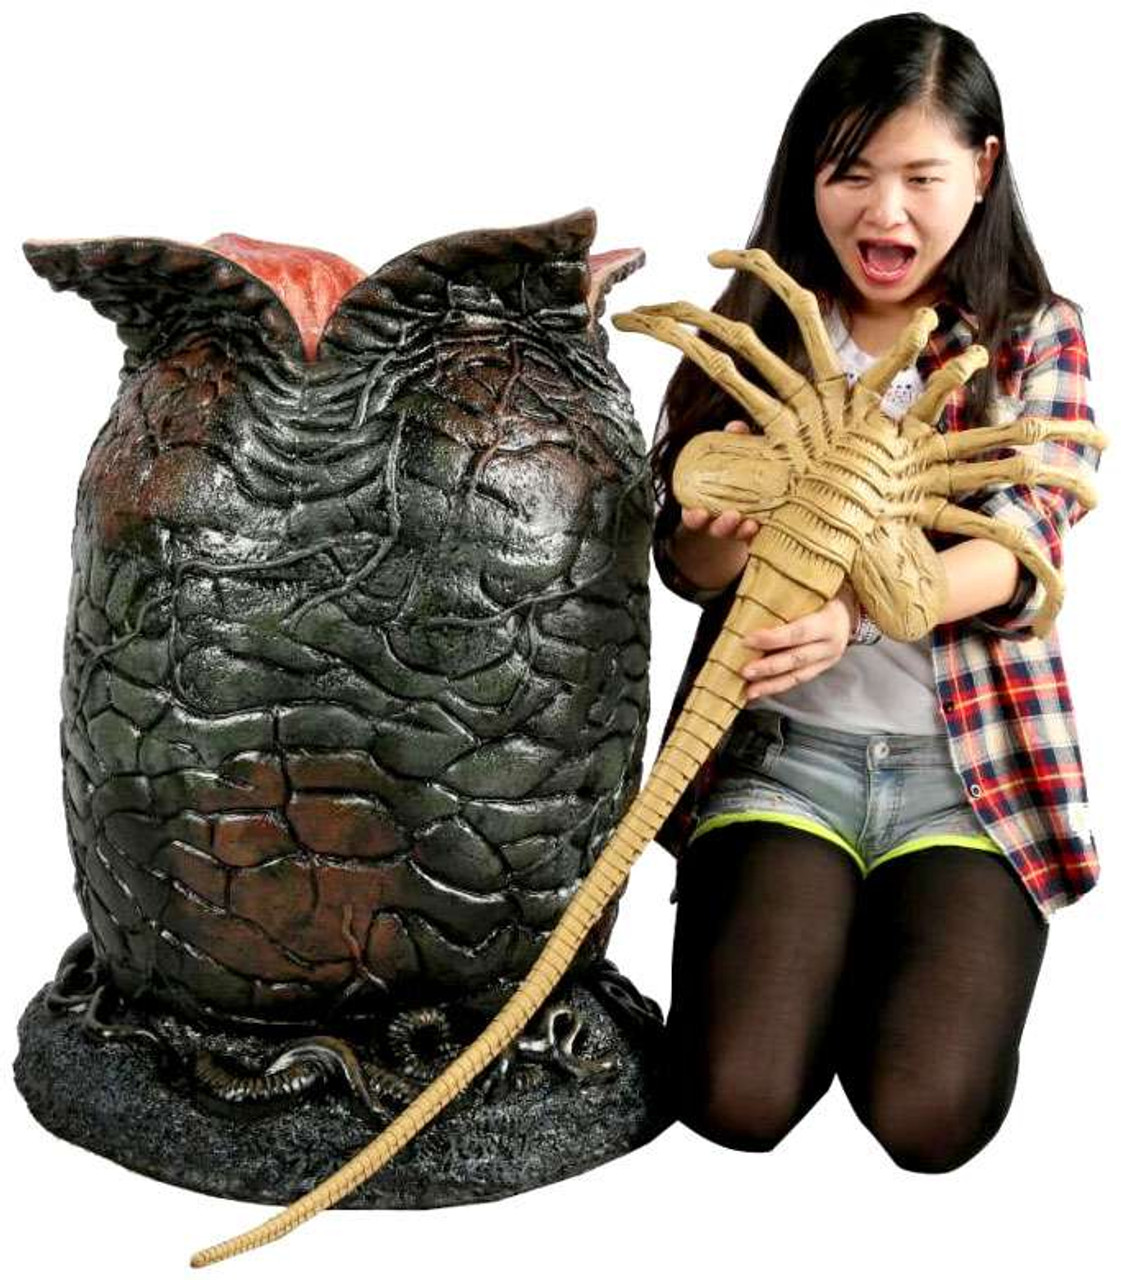 neca-aliens-life-size-egg-and-facehugger-prop-replica-with-led-lights-pre-order-ships-march-13__11575.1461389677.jpg